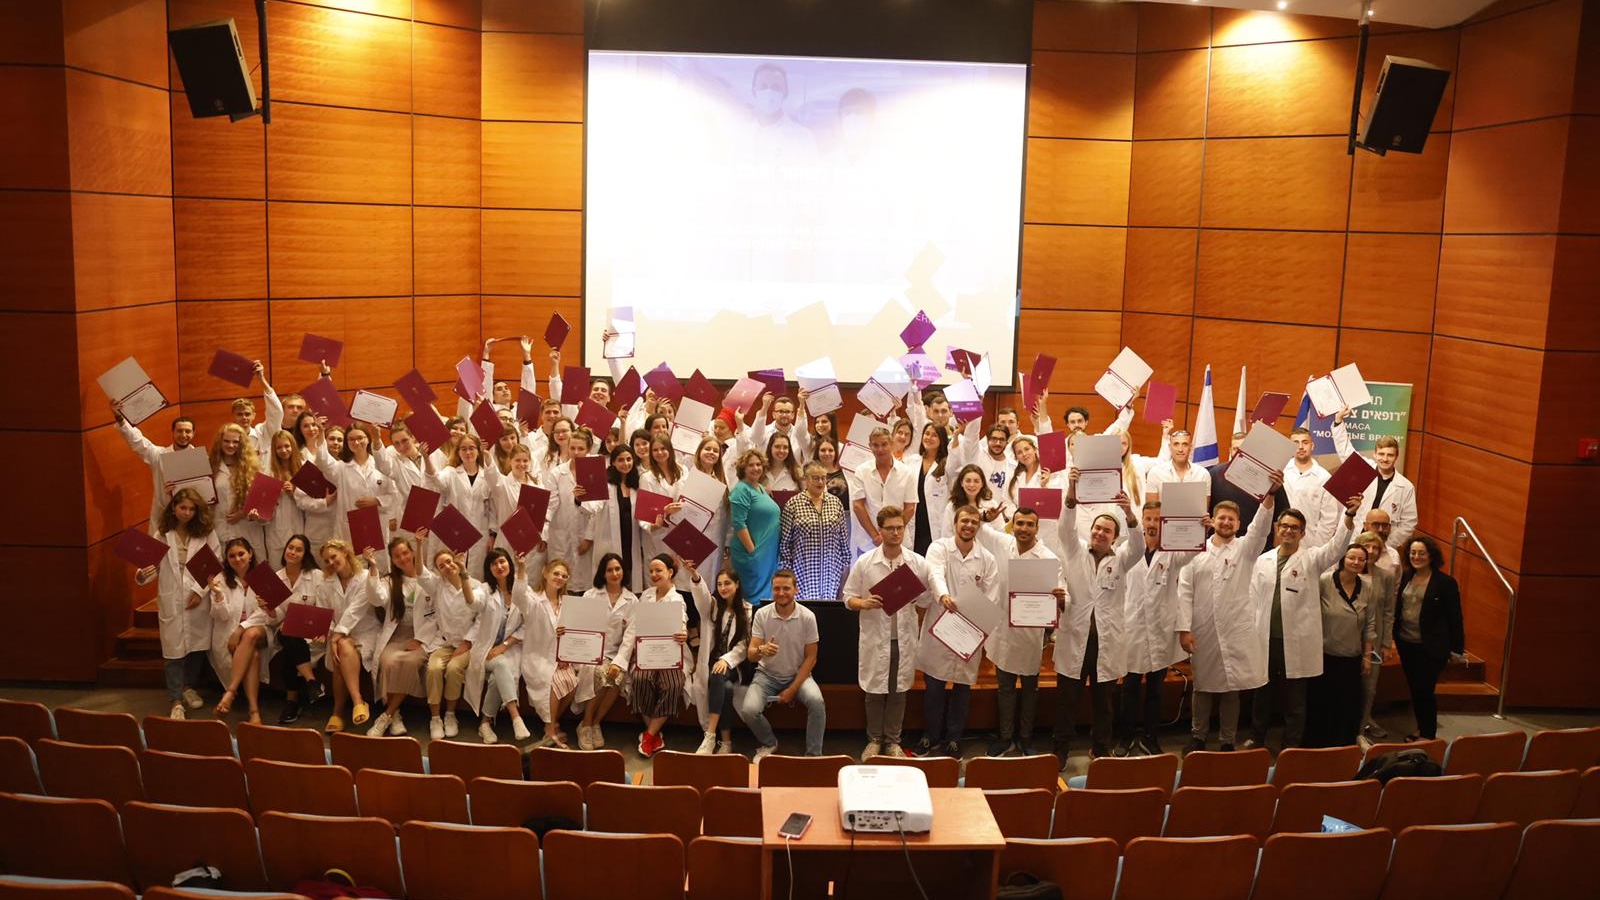 Seventy Eastern European immigrants celebrating the completion of the Physicians Program at Rambam Health Care Campus. Photo by Olivier Fitoussi